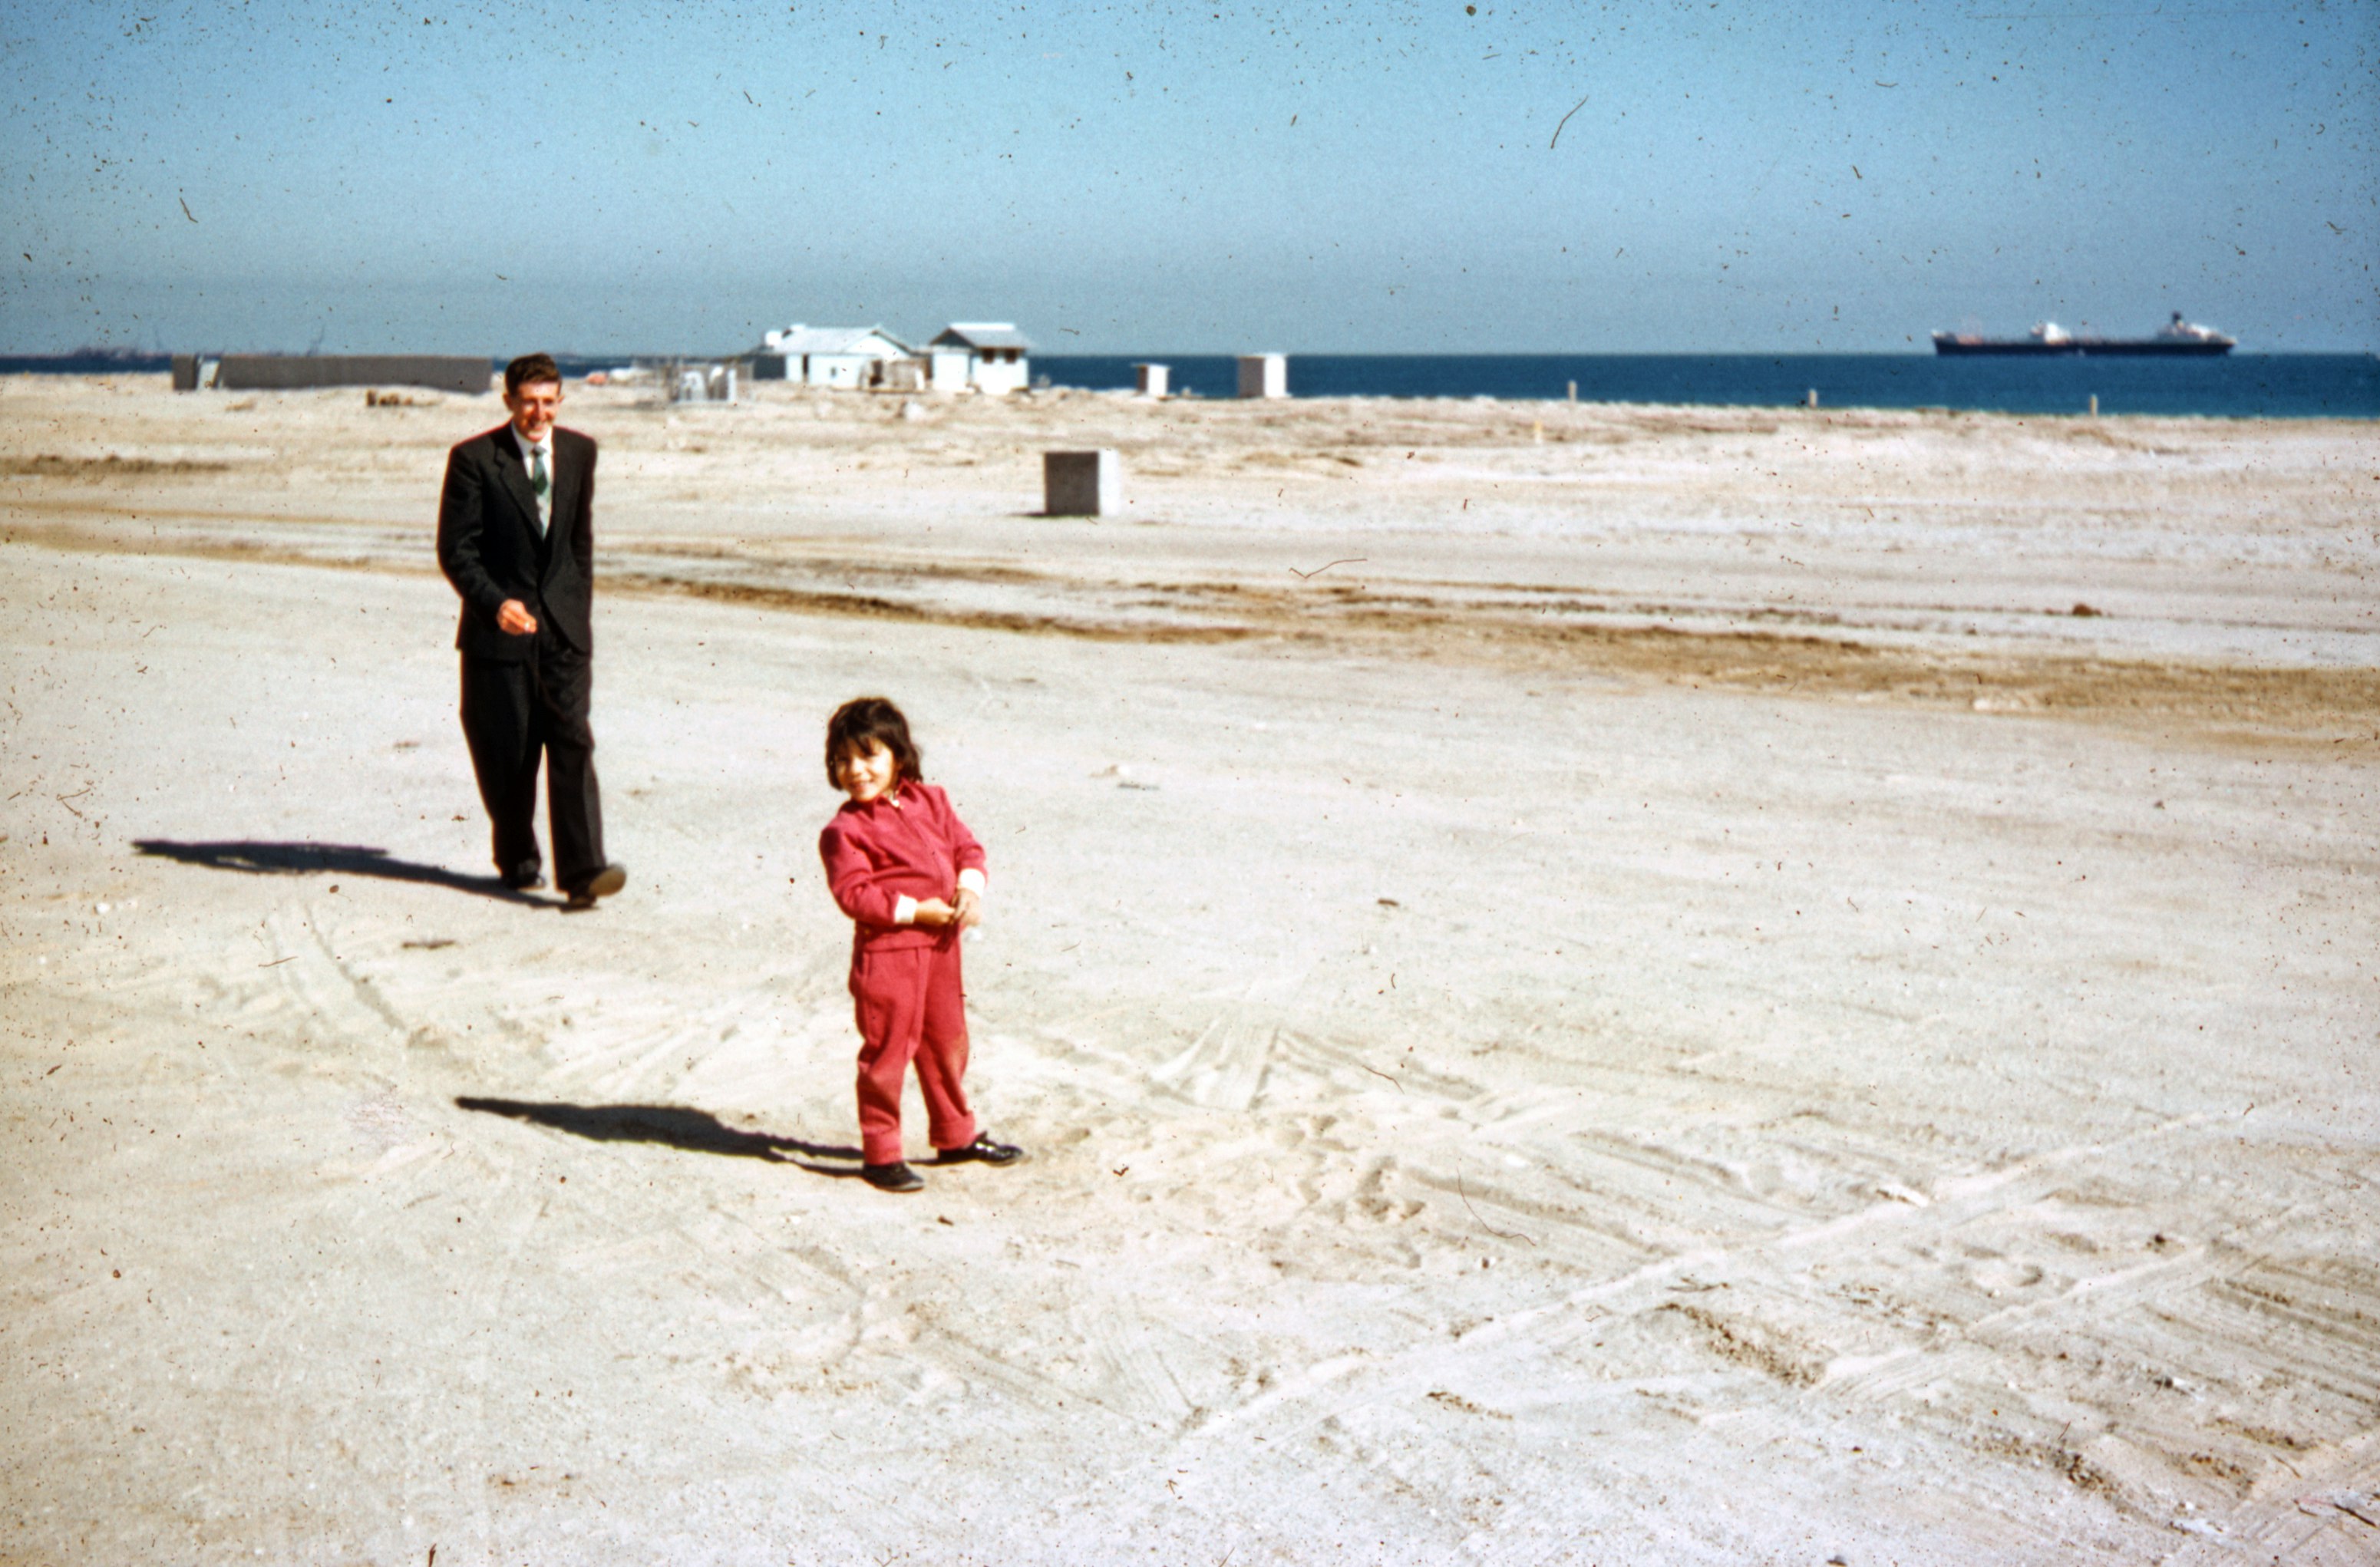 woman in red coat standing beside man in black suit on beach during daytime